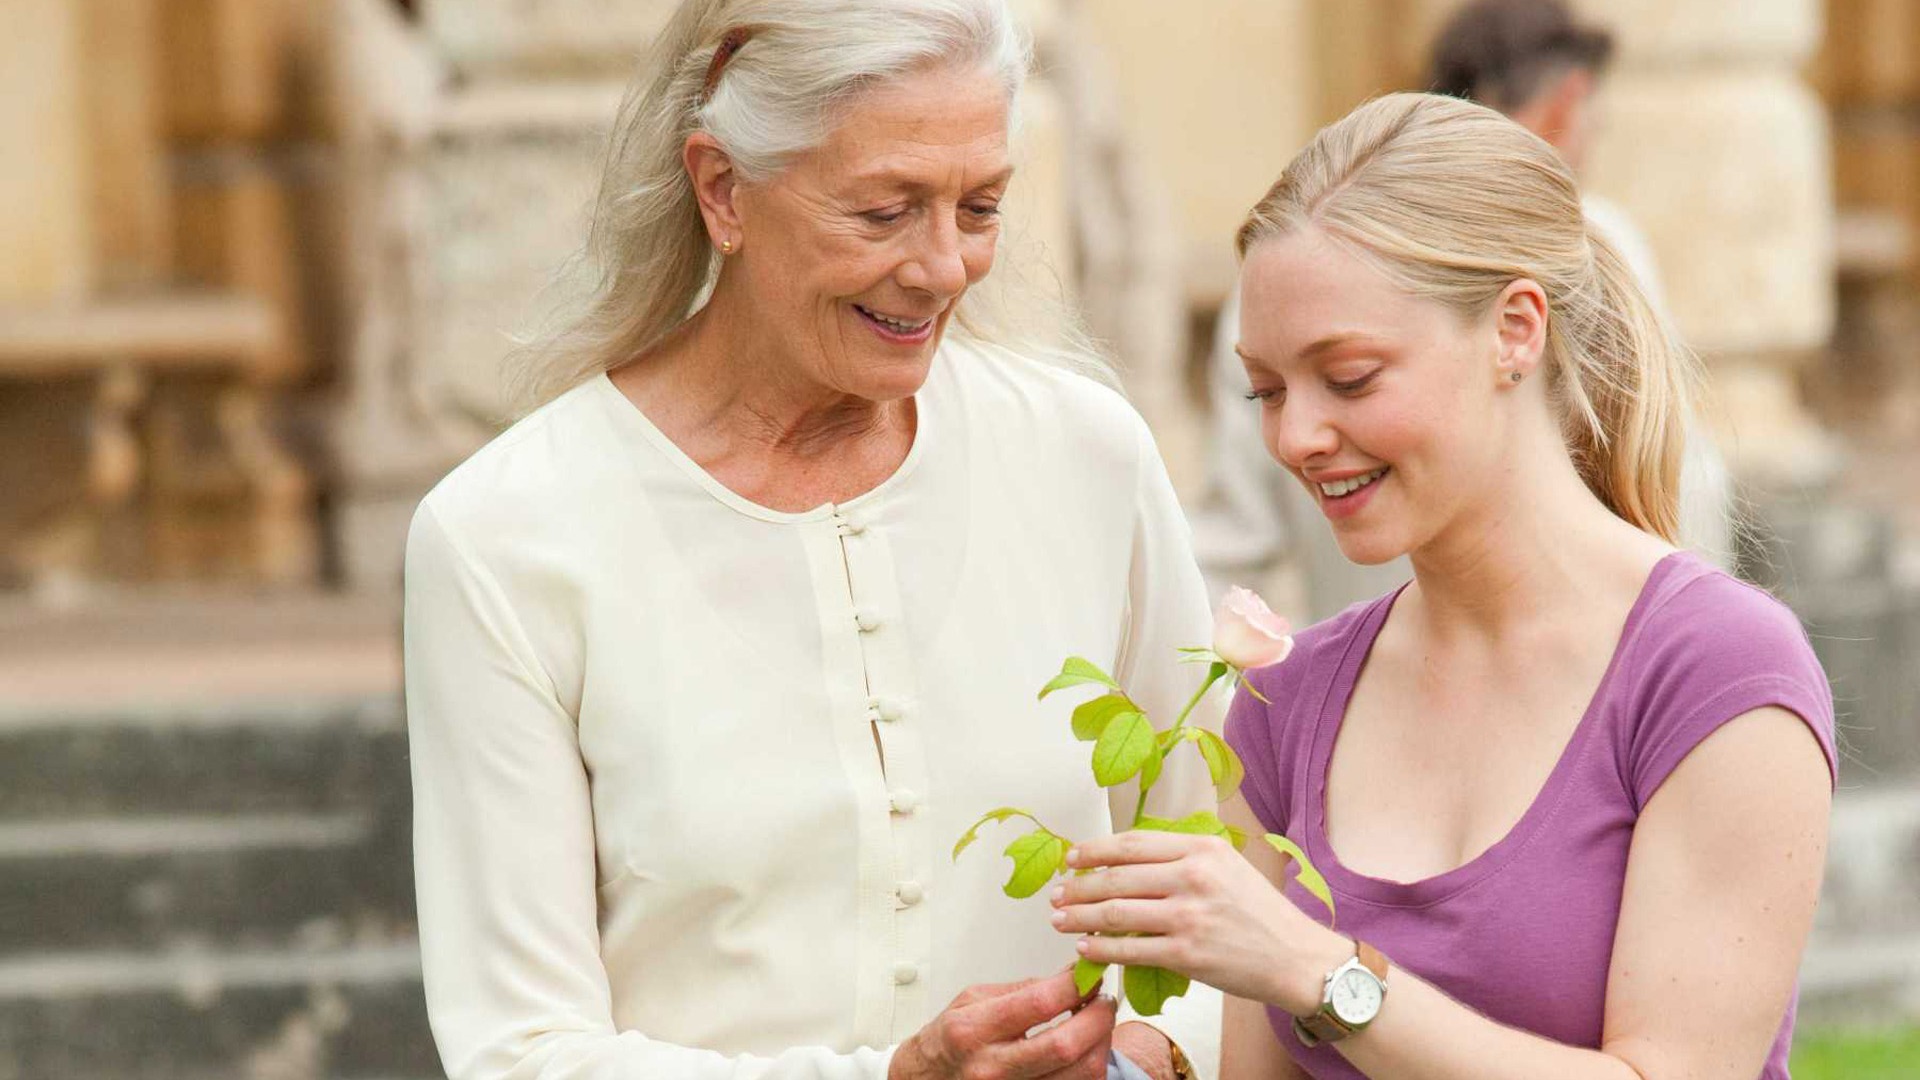 Letters to Juliet 给朱丽叶的信 高清壁纸5 - 1920x1080